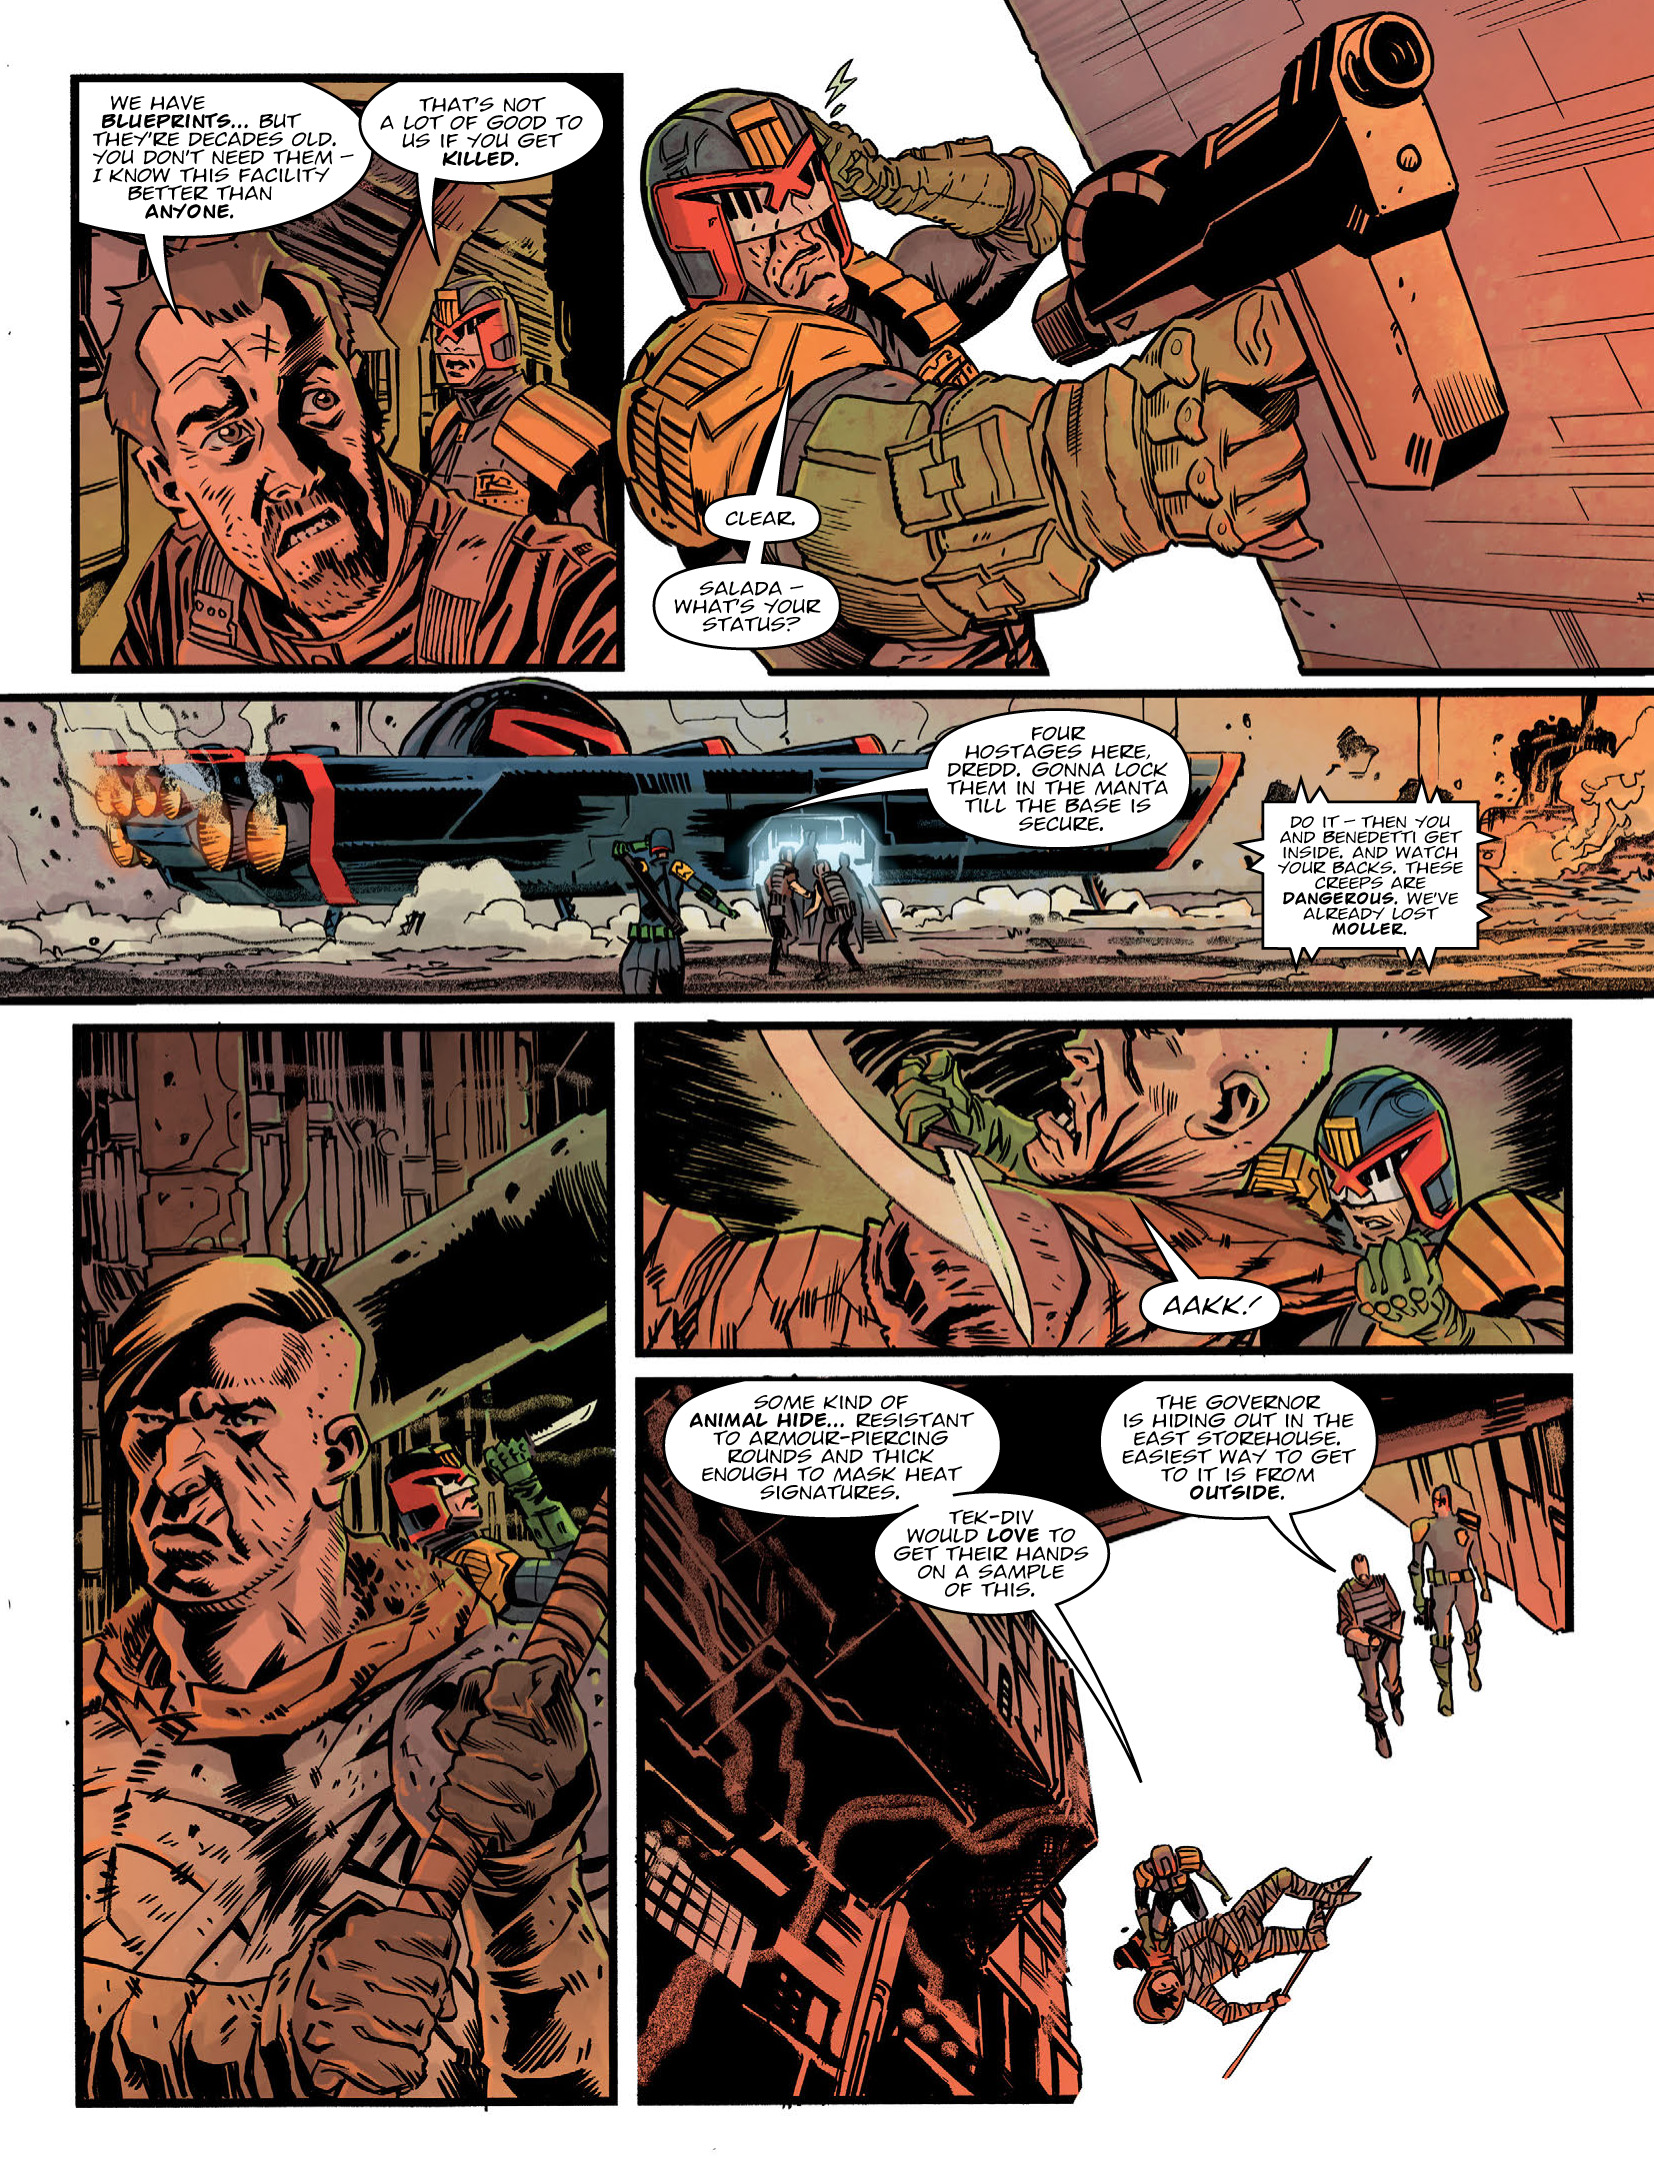 2000 AD: Chapter 2057 - Page 4